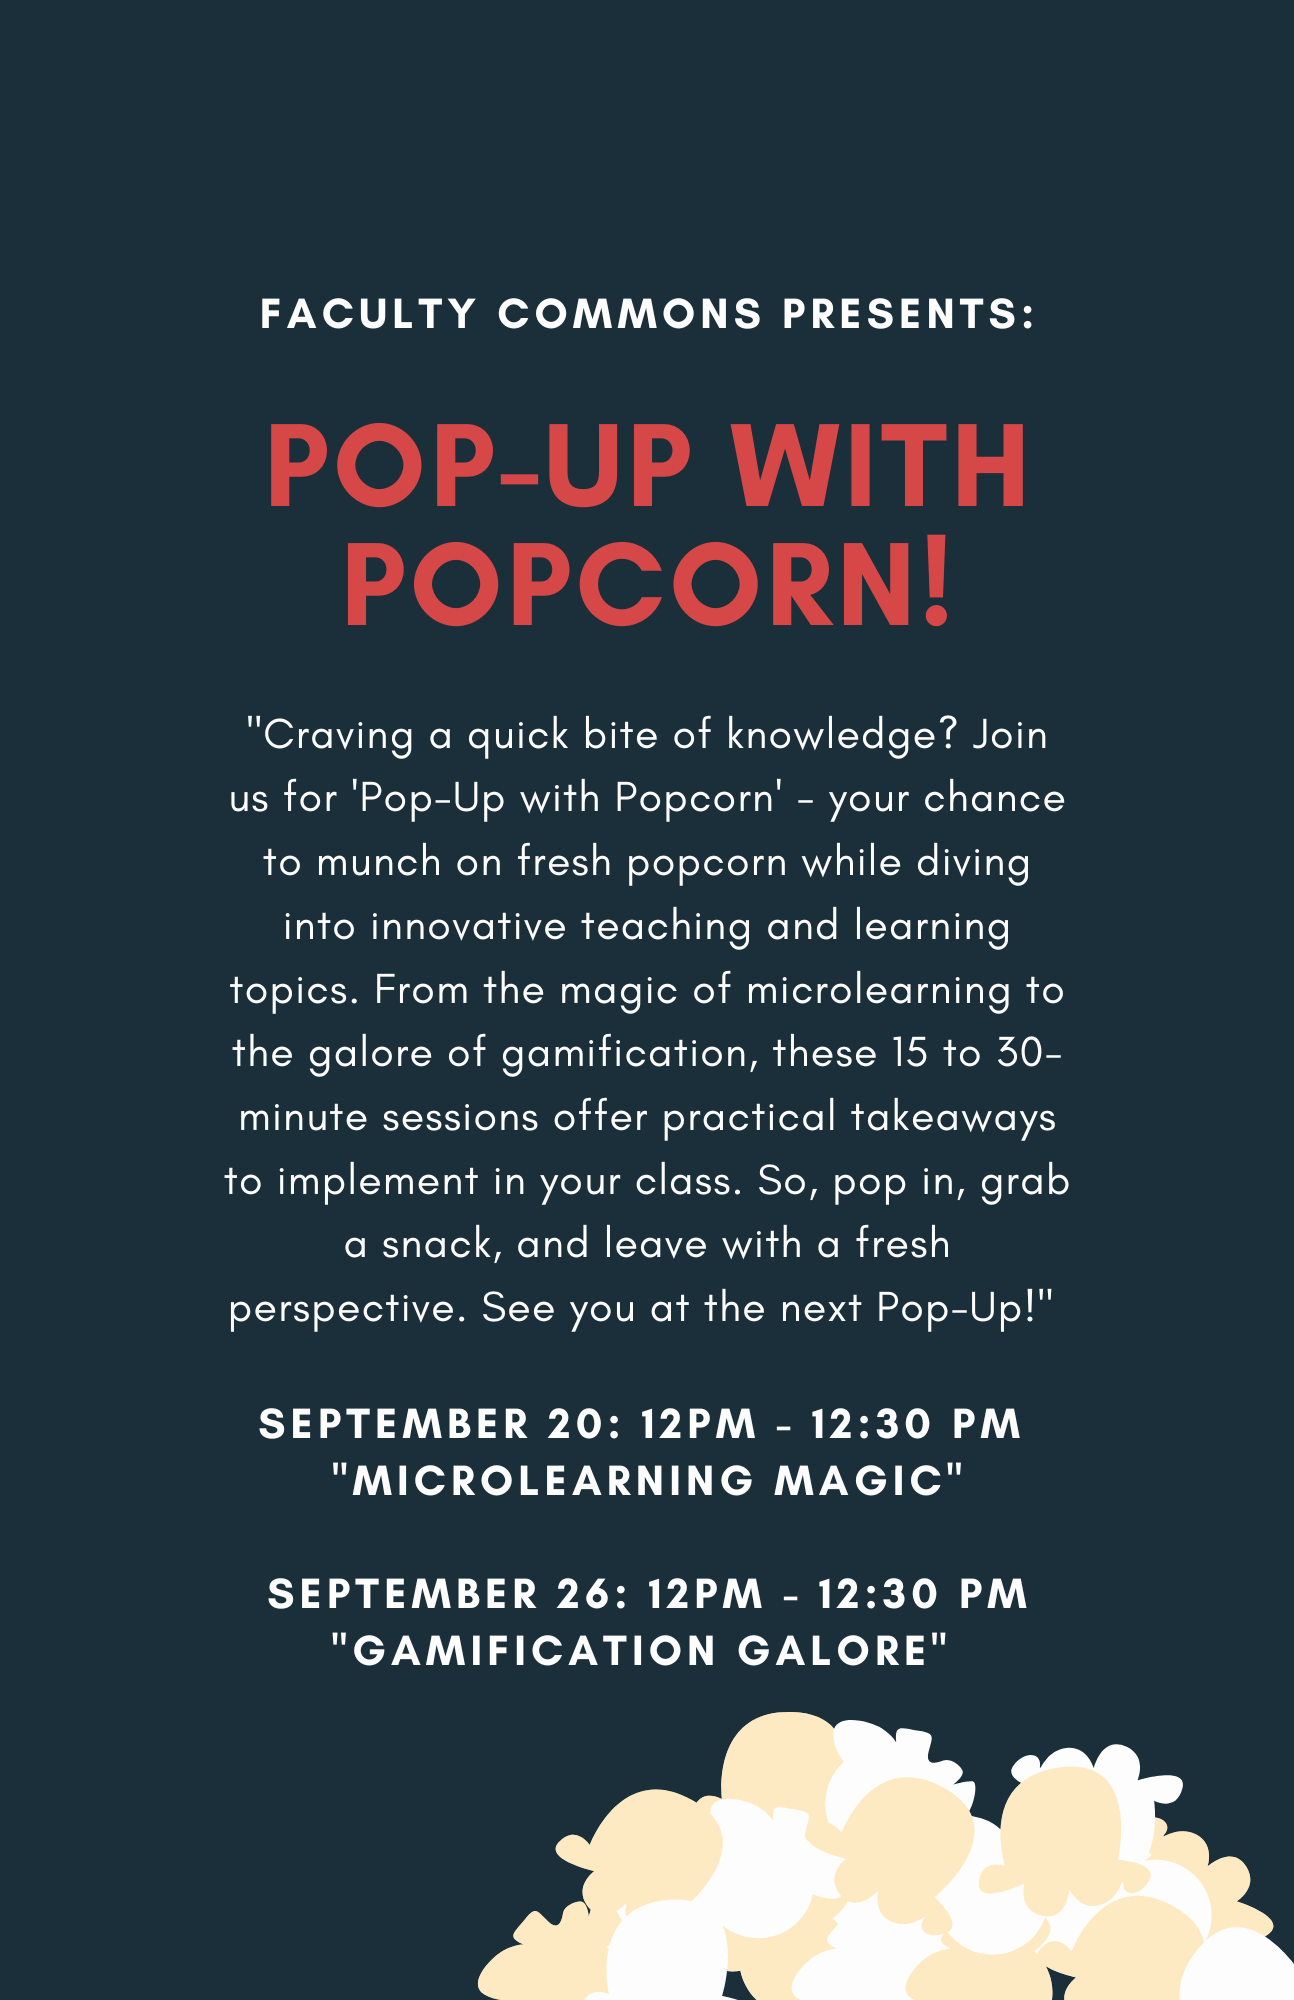 Pop-up with Popcorn Gamification Galore